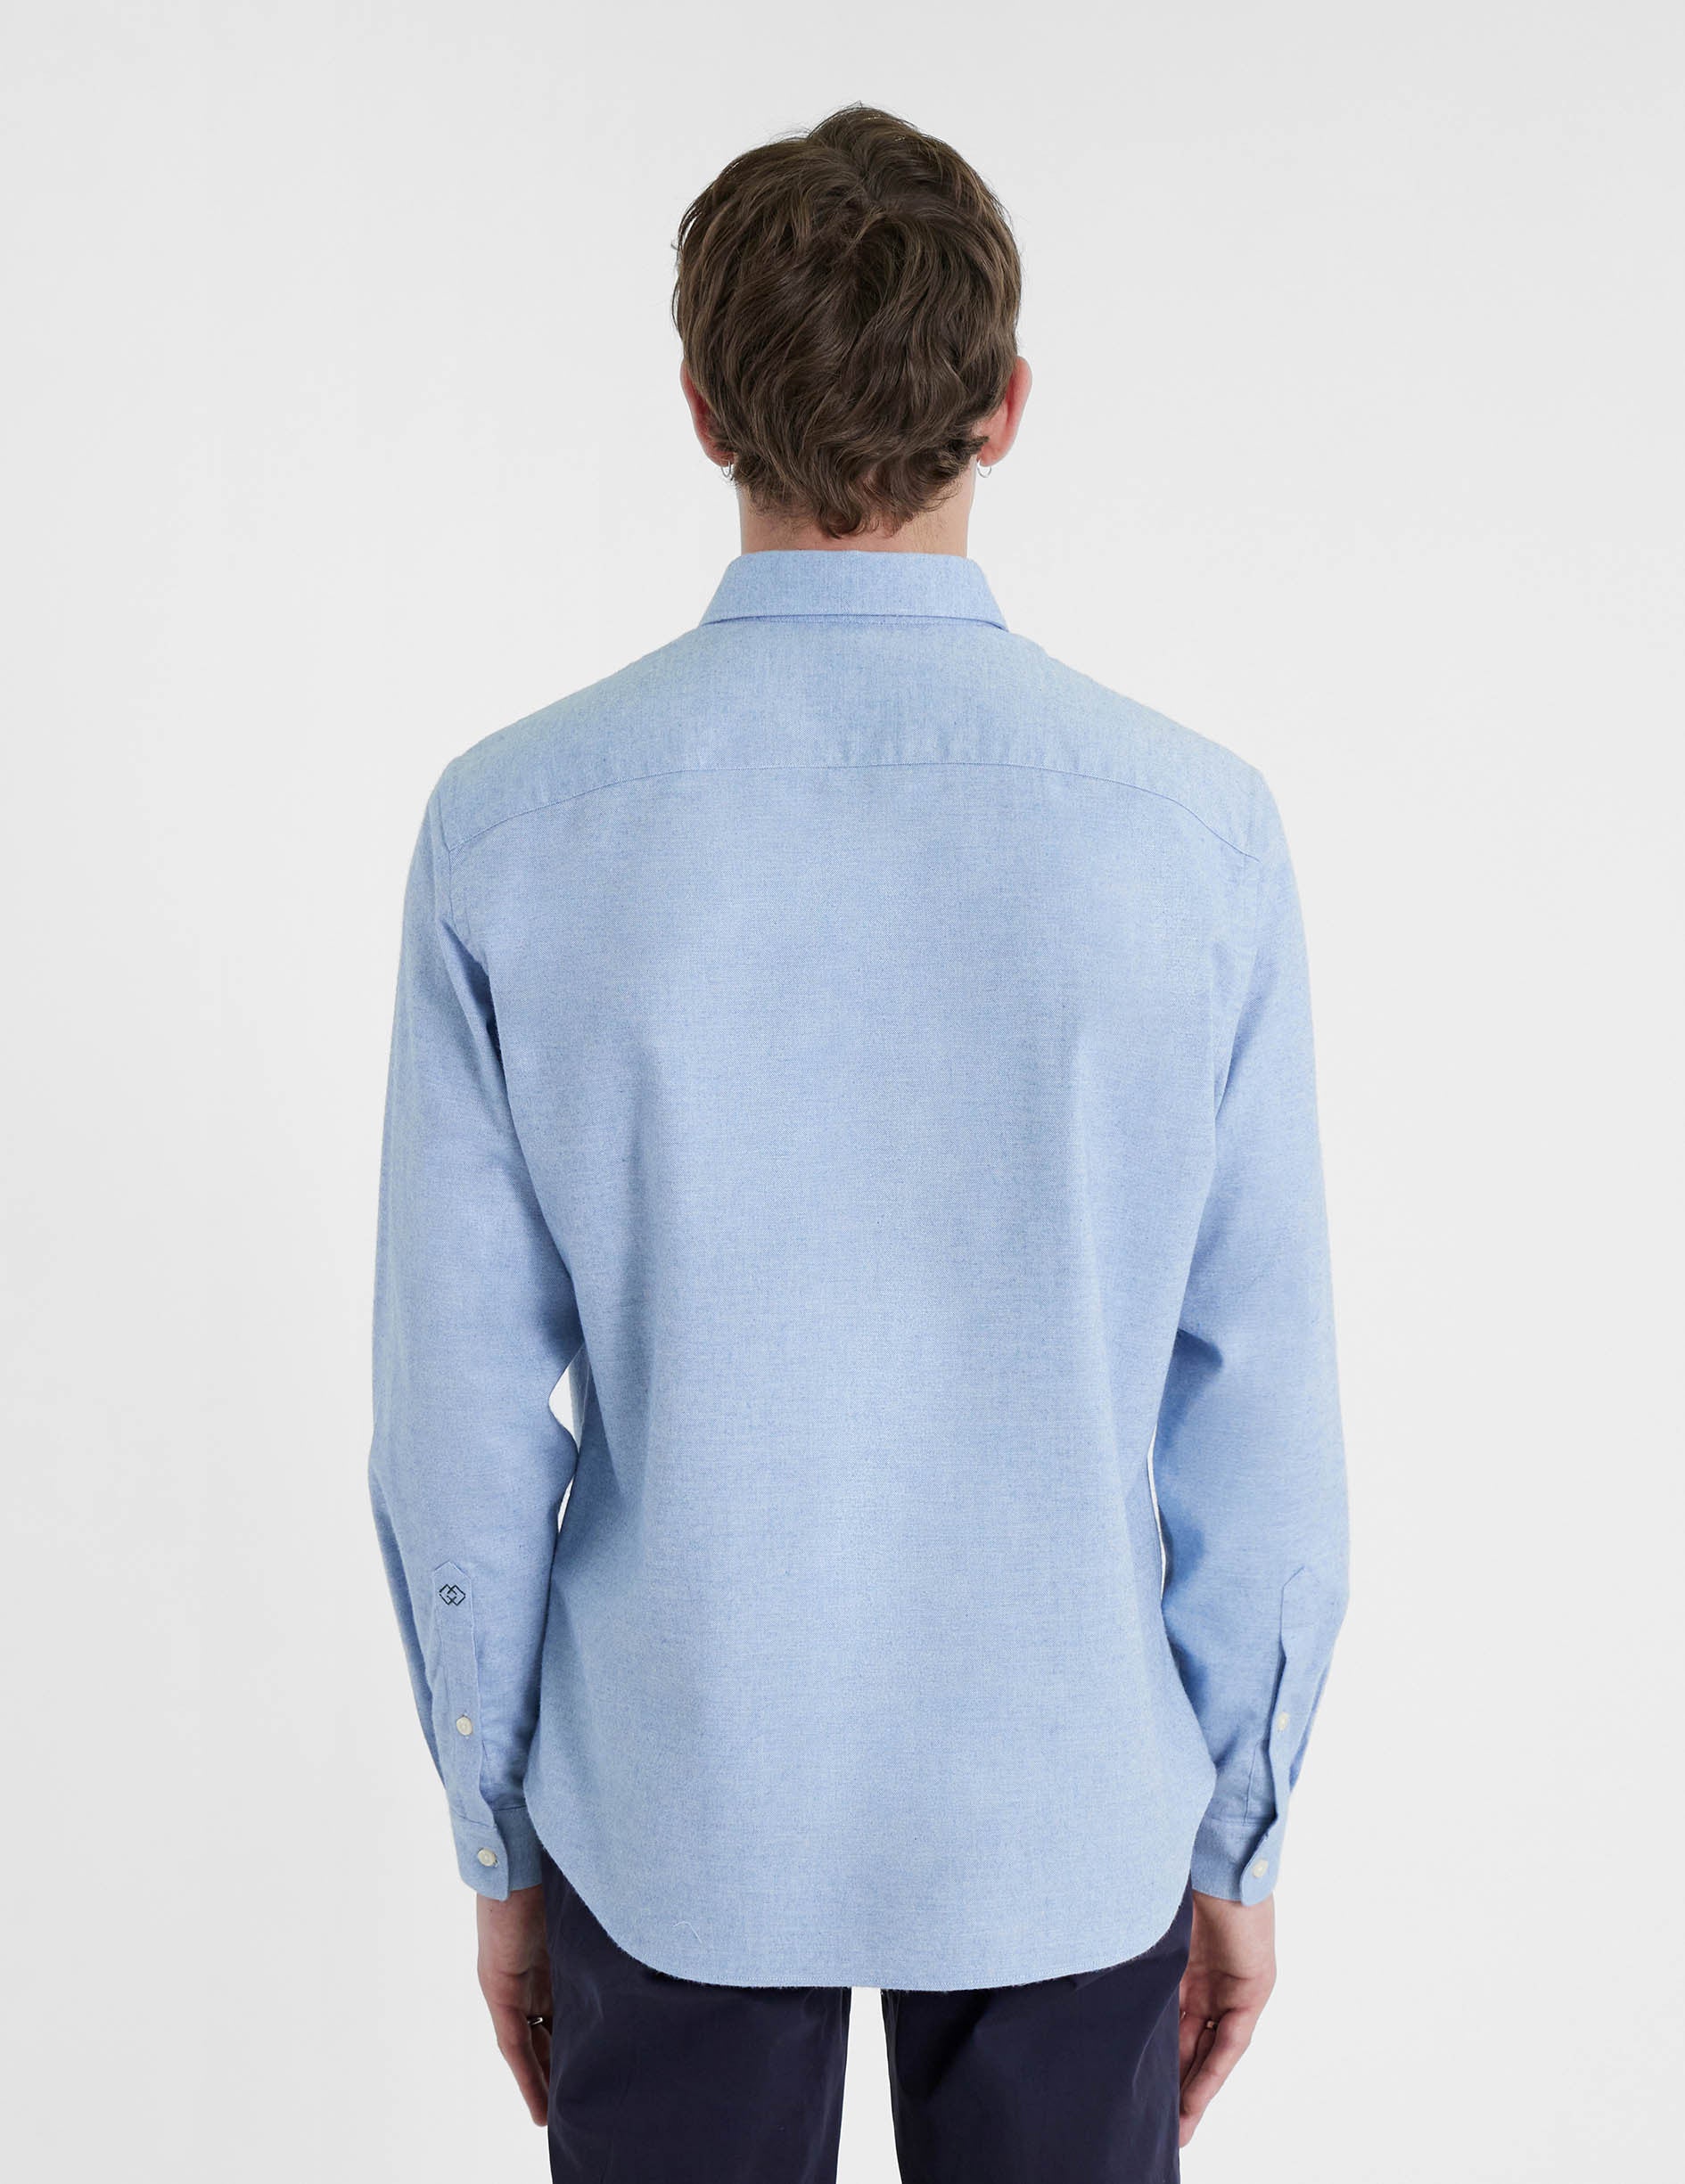 Gaspard shirt in blue cotton cashmere - Flannel - American Collar